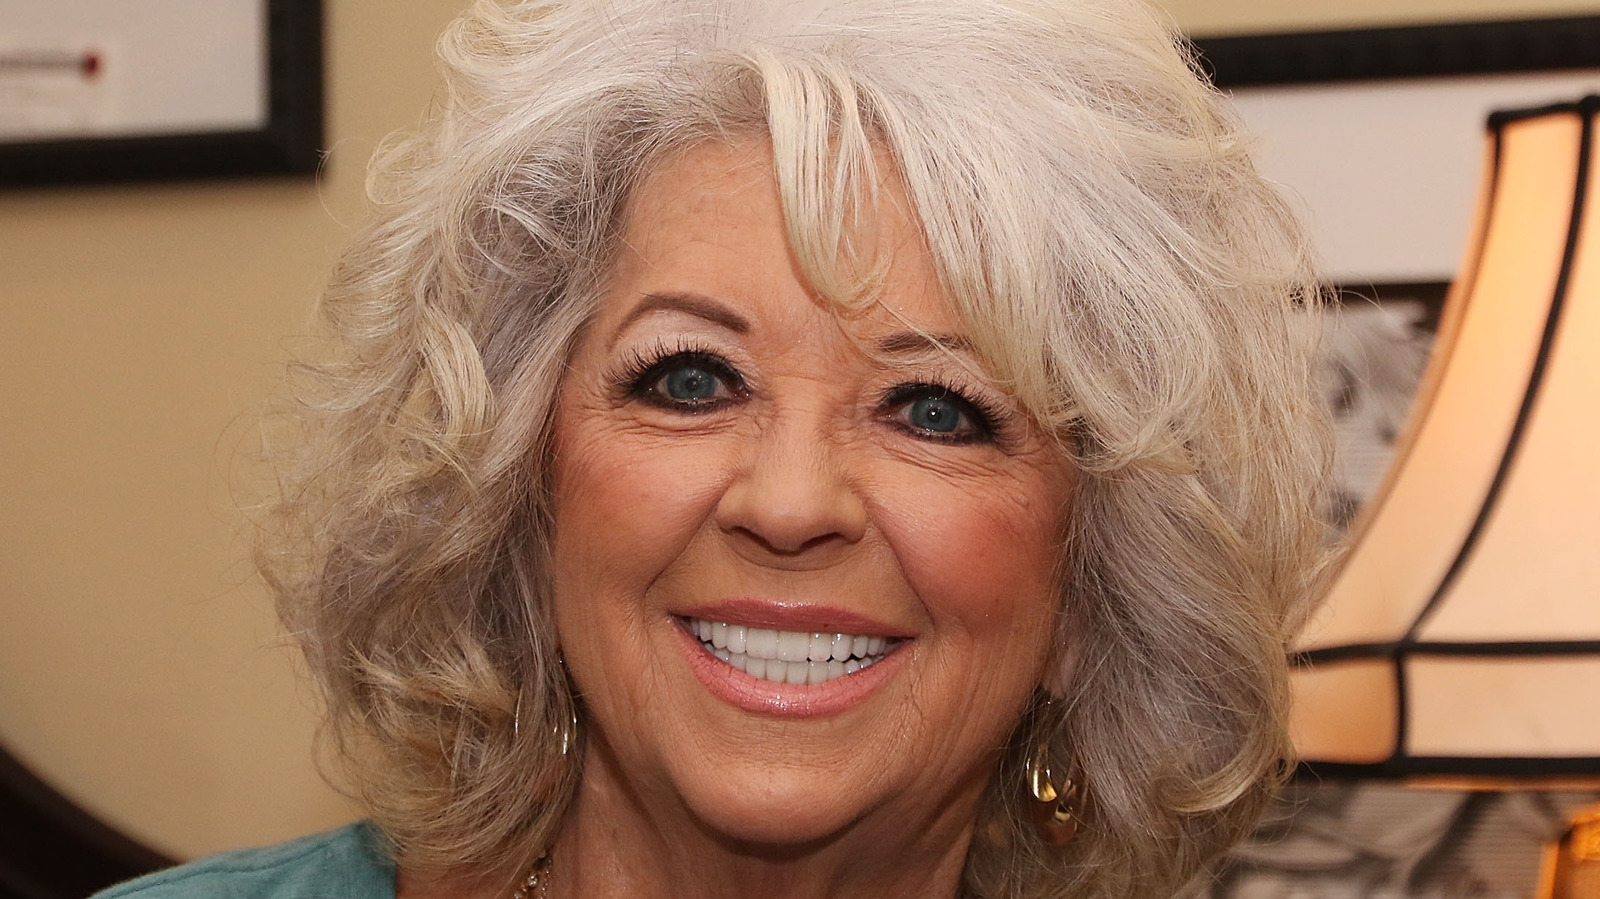 Paula Deen Returns to TV With New Show, Positively Paula